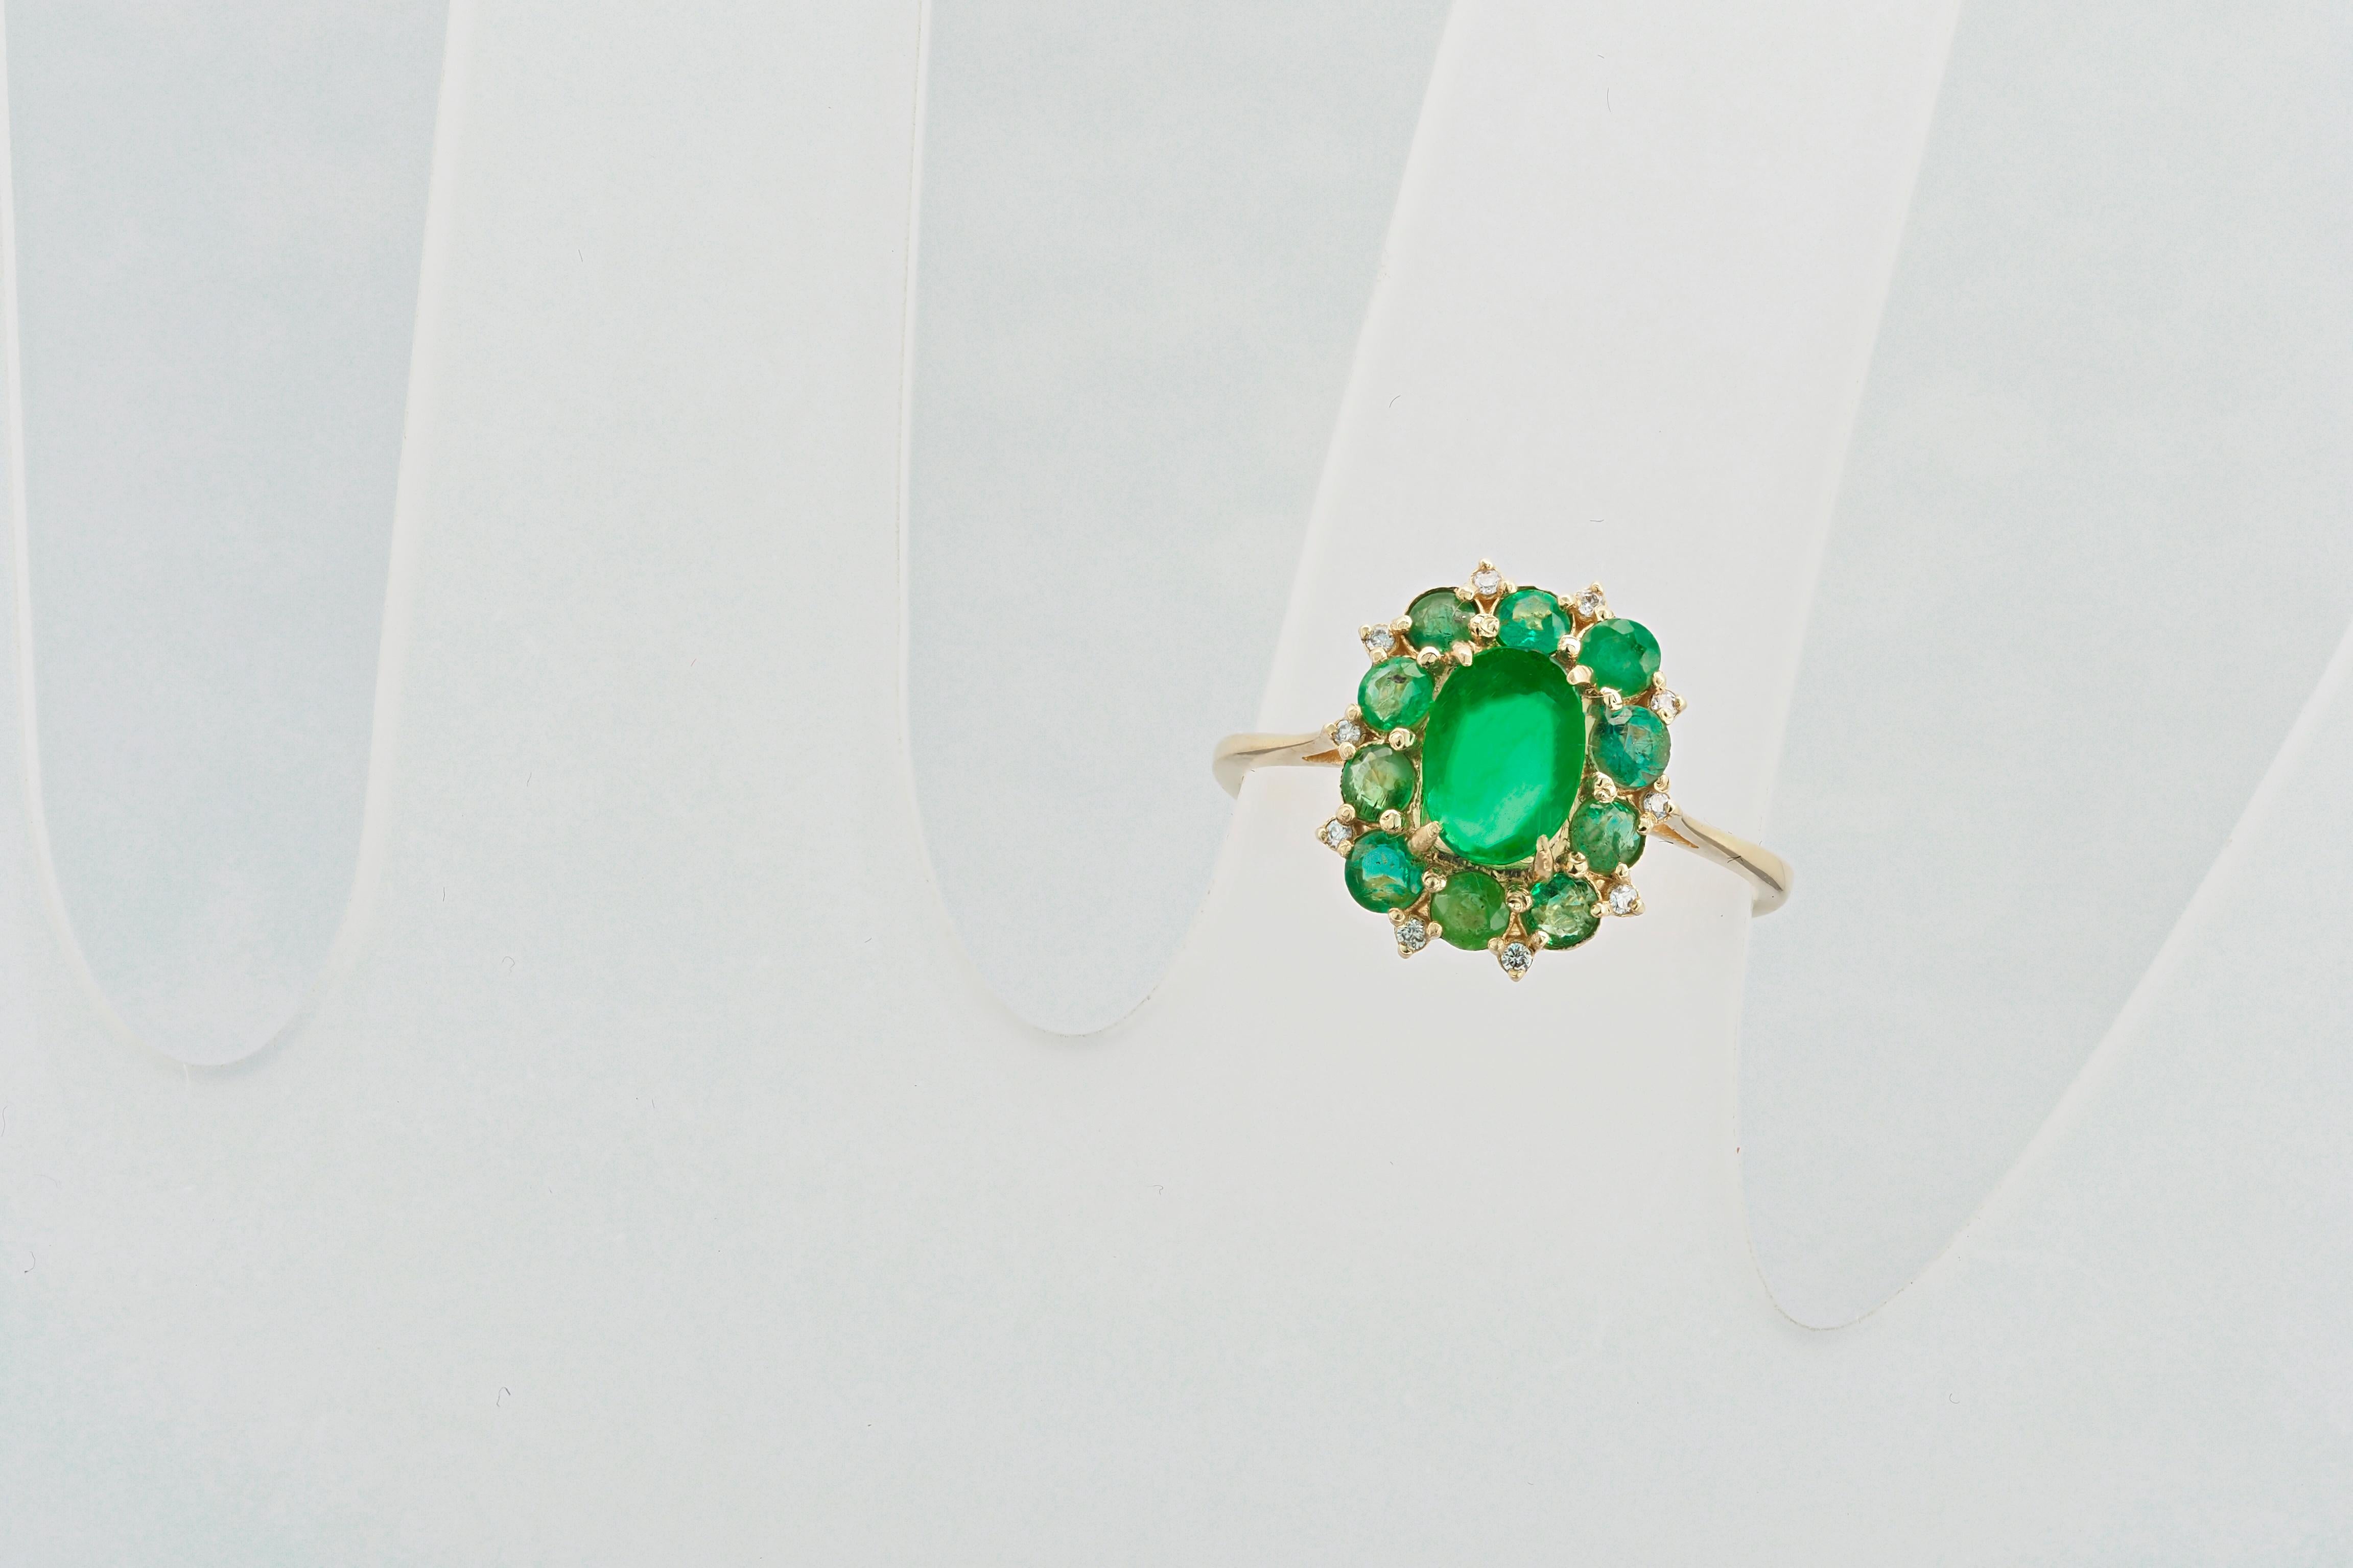 14 kt solid gold ring with natural emeralds and diamonds. May birthstone. Beautiful ring with central emerald and side emeralds and diamonds.

Total weight: 2.5 g. depends from size

Central stone: Natural emerald.
Weight: approx 0.9 -1 ct. 
Color: